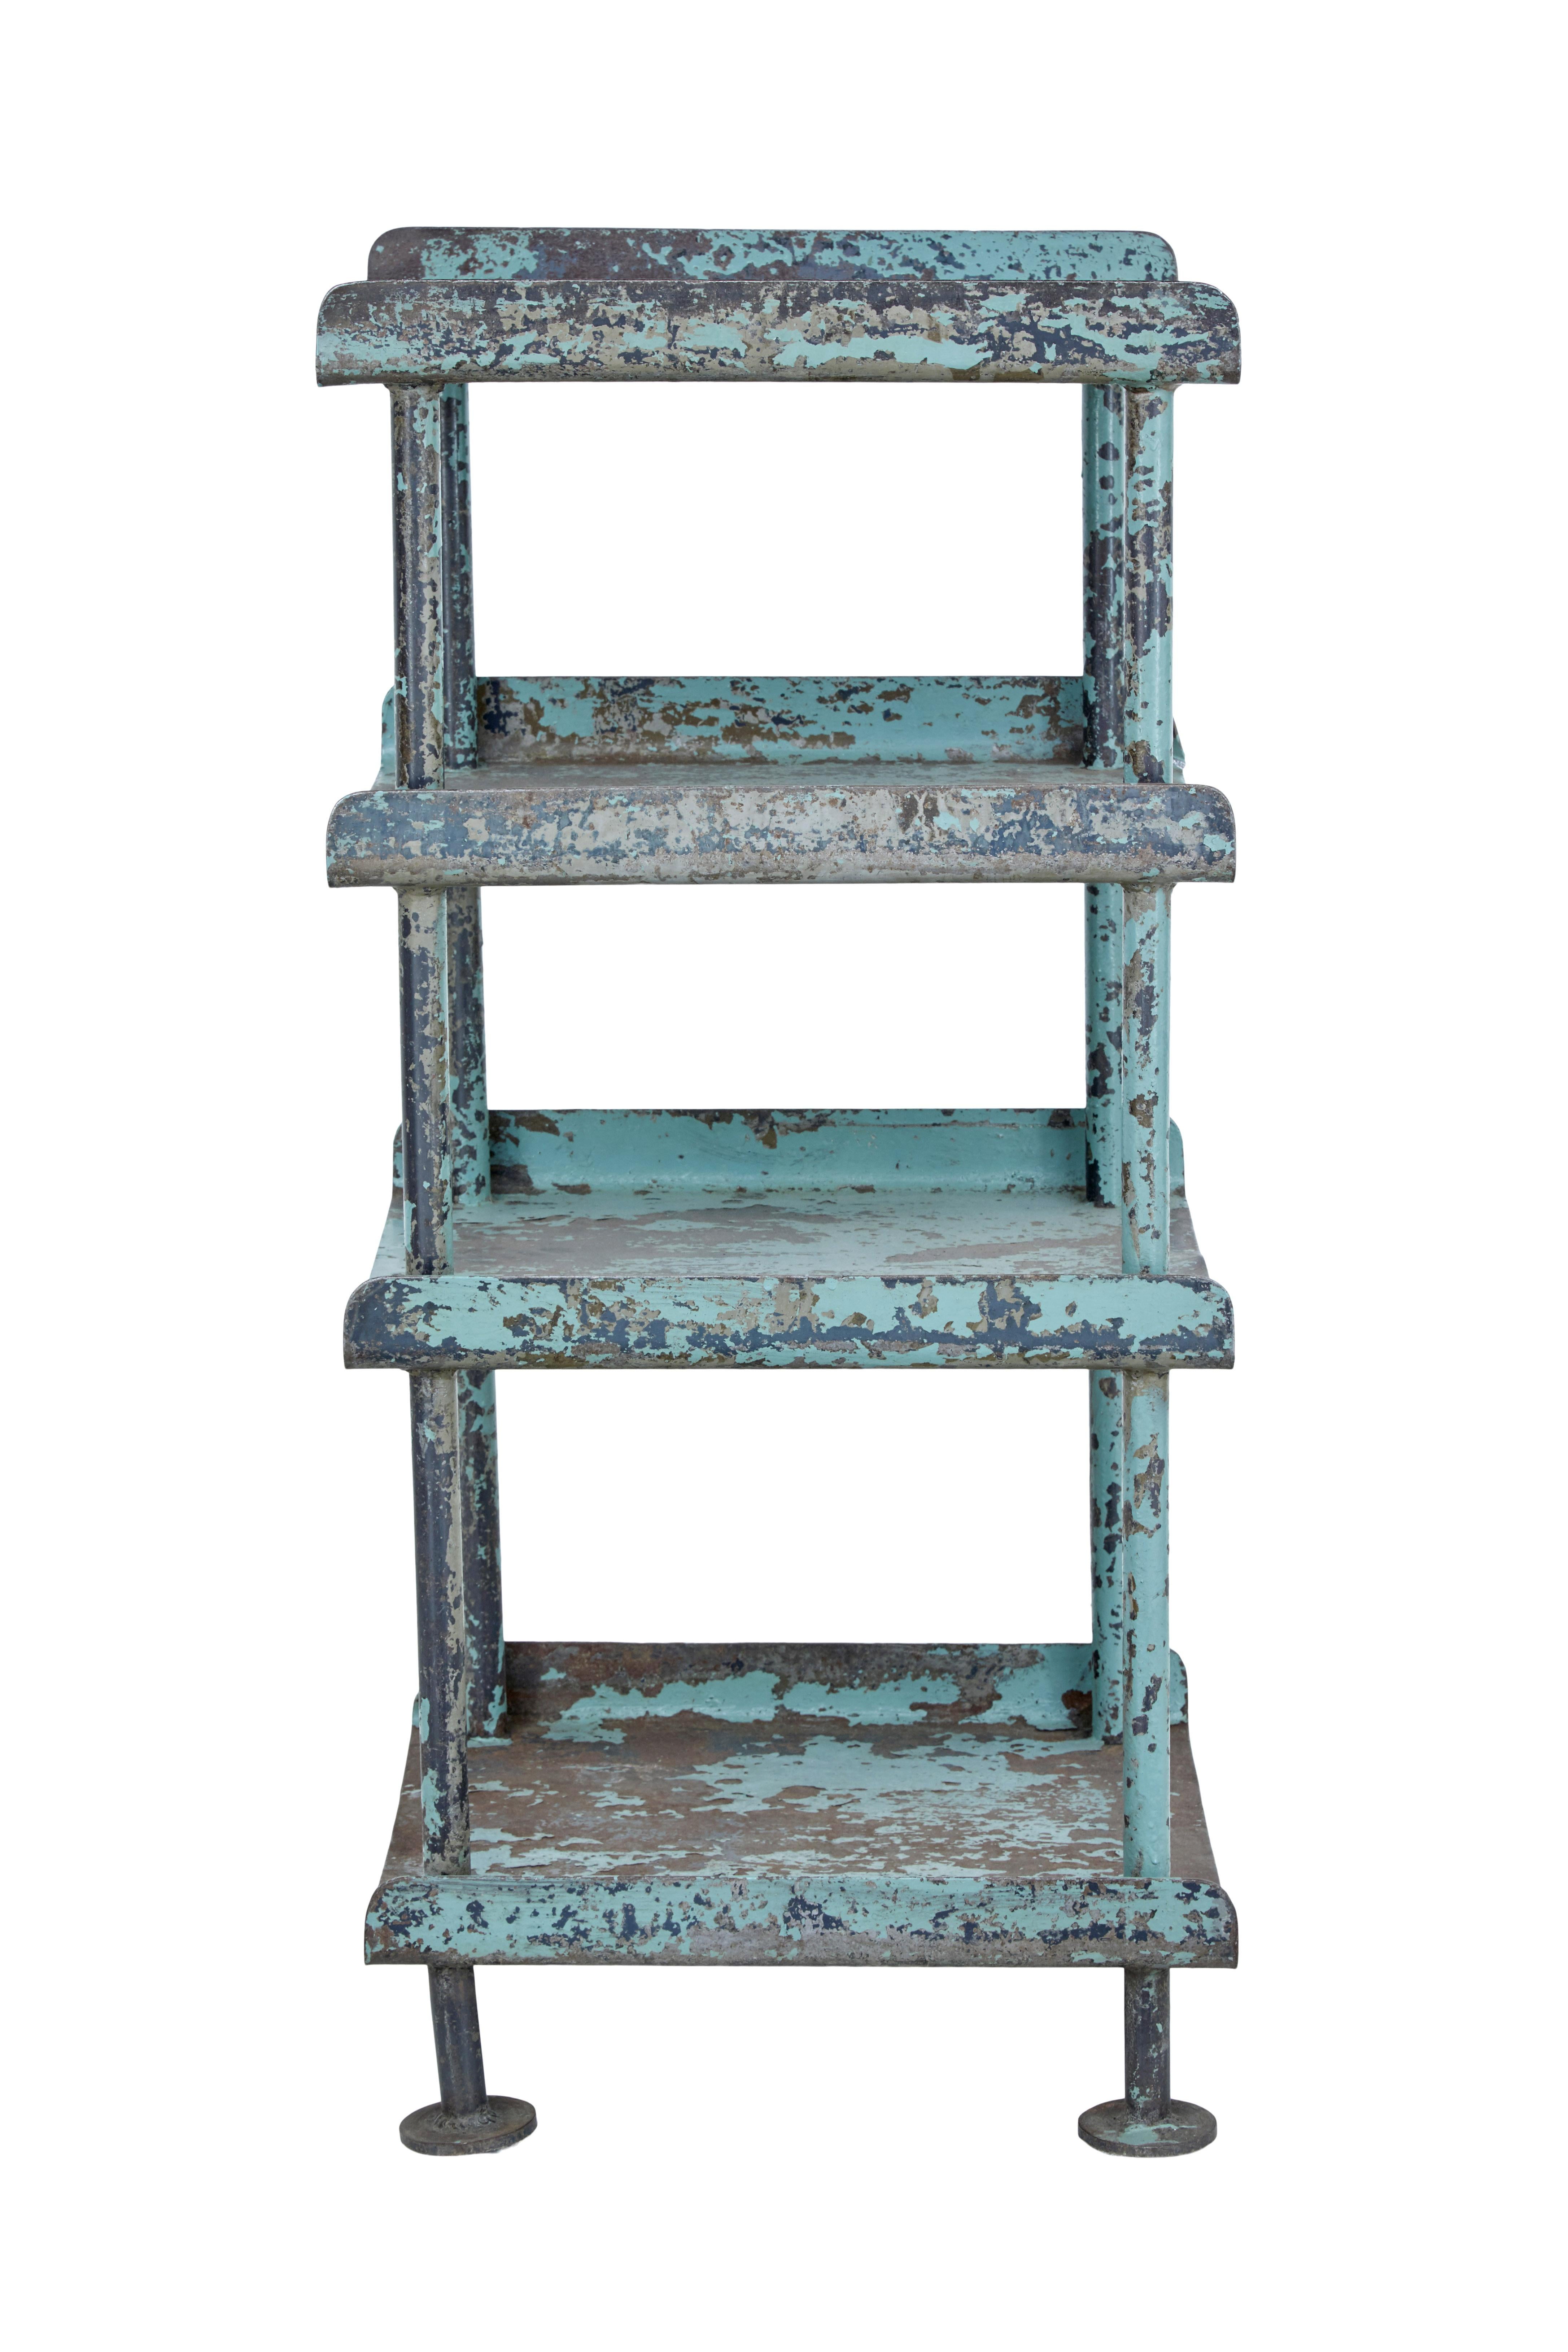 Early 20th Century 1920's Industrial Painted Shelving Unit